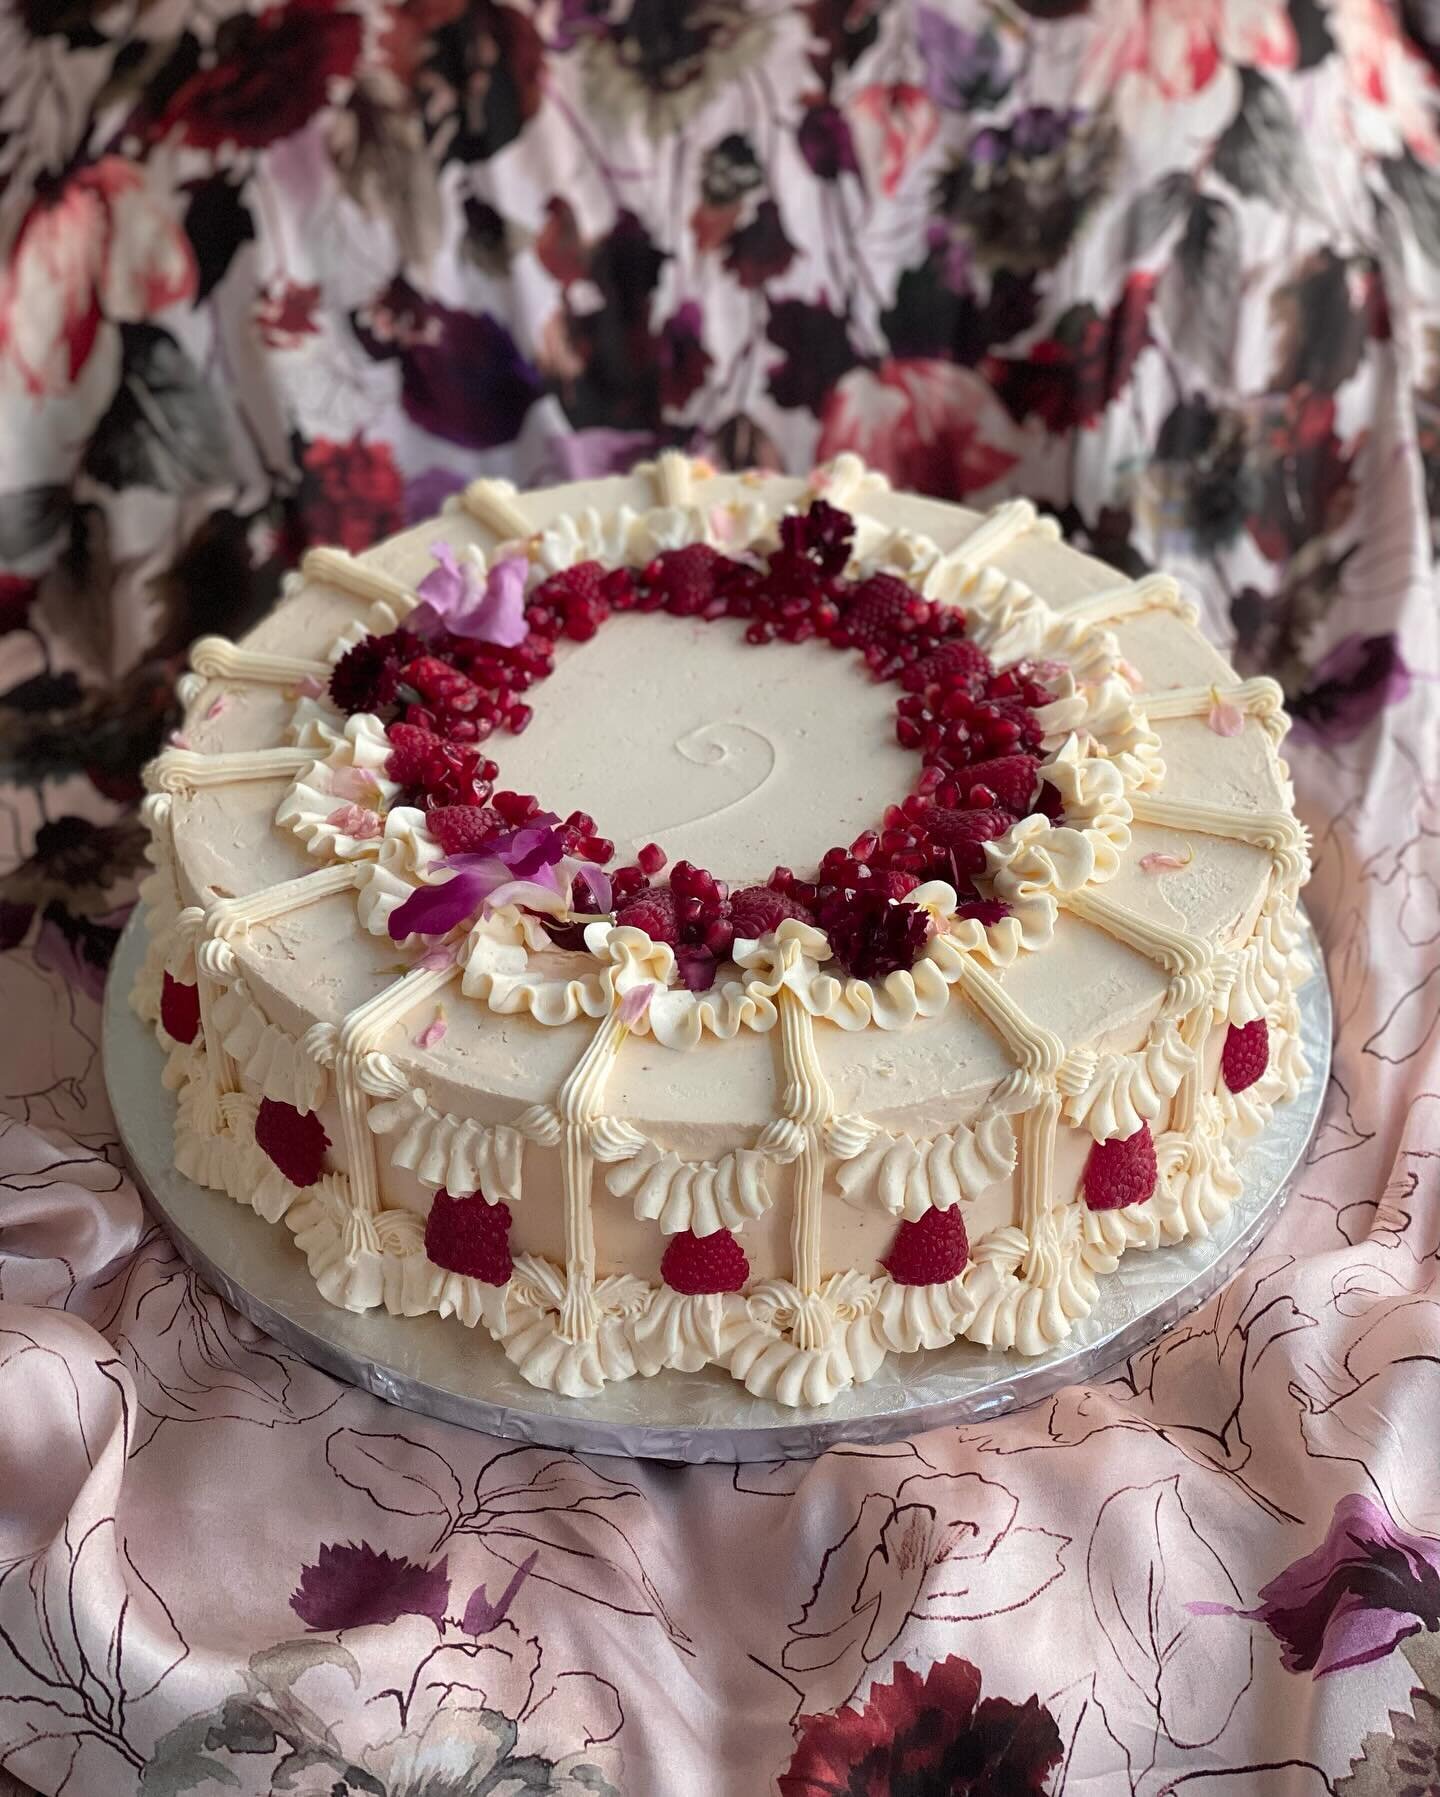 can you handle the elegance and drama 😌 a 14 inch edible wonder for katie and @meanzabdel&rsquo;s wedding 💒 brown sugar chiffon soaked in espresso and fresh clementine juice, buttered toast pastry cream, clementine raspberry pomegranate jelly, cara